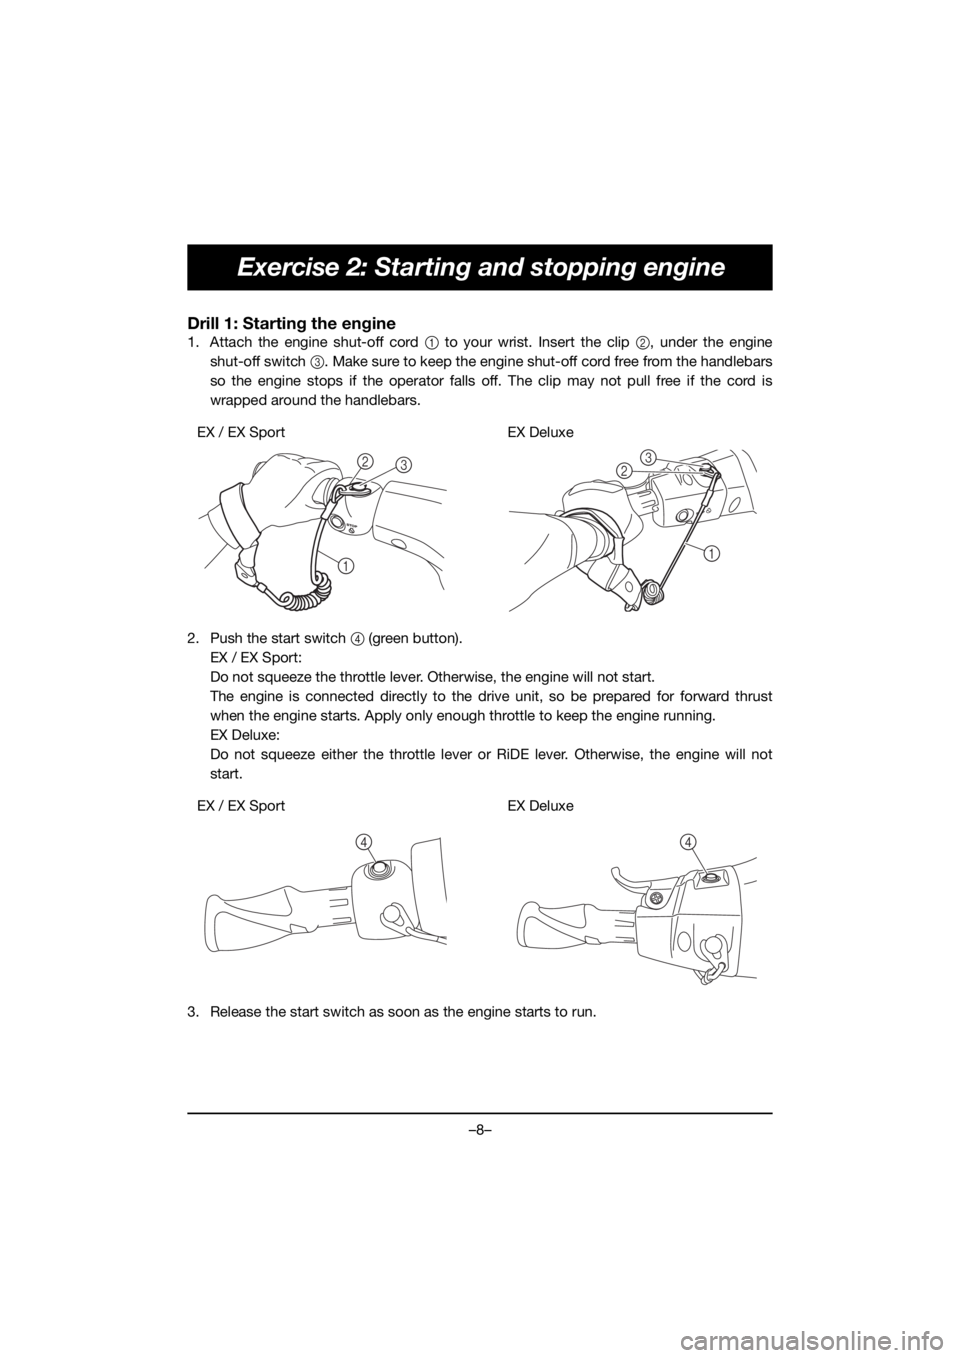 YAMAHA EX DELUXE 2019  ΟΔΗΓΌΣ ΧΡΉΣΗΣ (in Greek) –8–
Exercise 2: Starting and stopping engine
Drill 1: Starting the engine
1. Attach the engine shut-off cord 1 to your wrist. Insert the clip 2, under the engine
shut-off switch 3. Make sure to ke